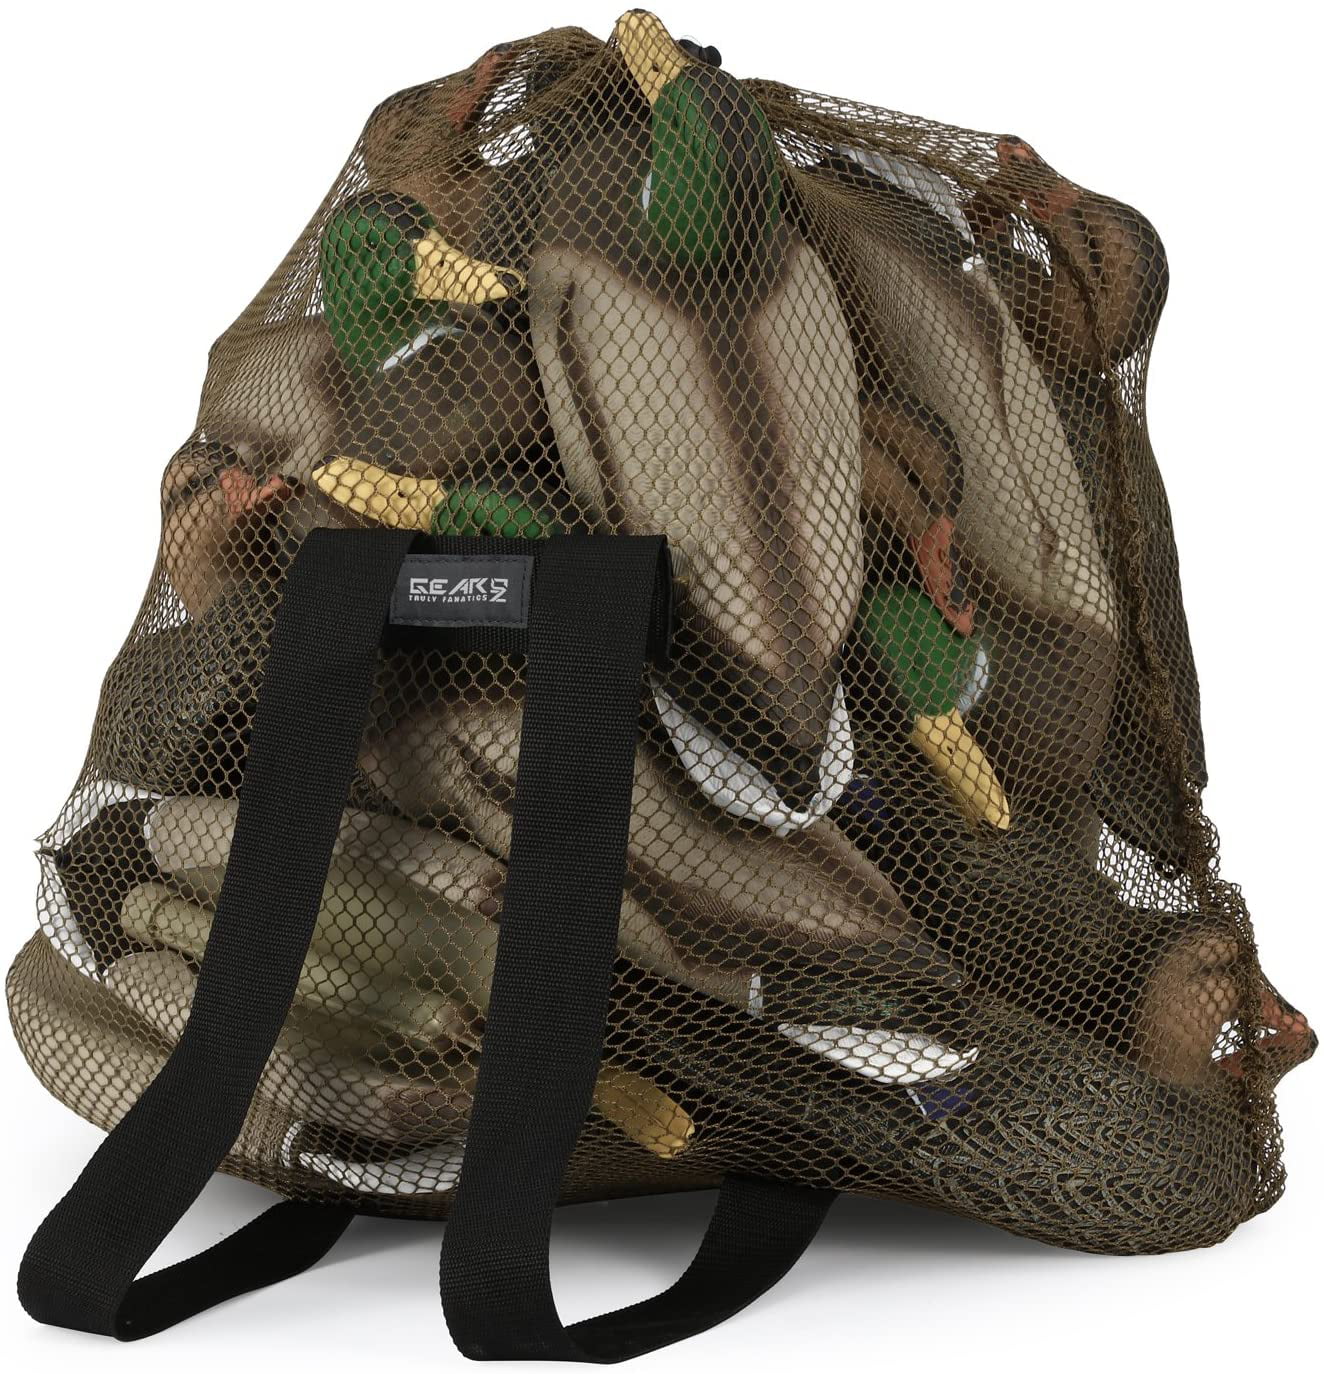 Duck Game Strap Game Carrier Waterfowl Decoy Bag Storage Pack Accessories 